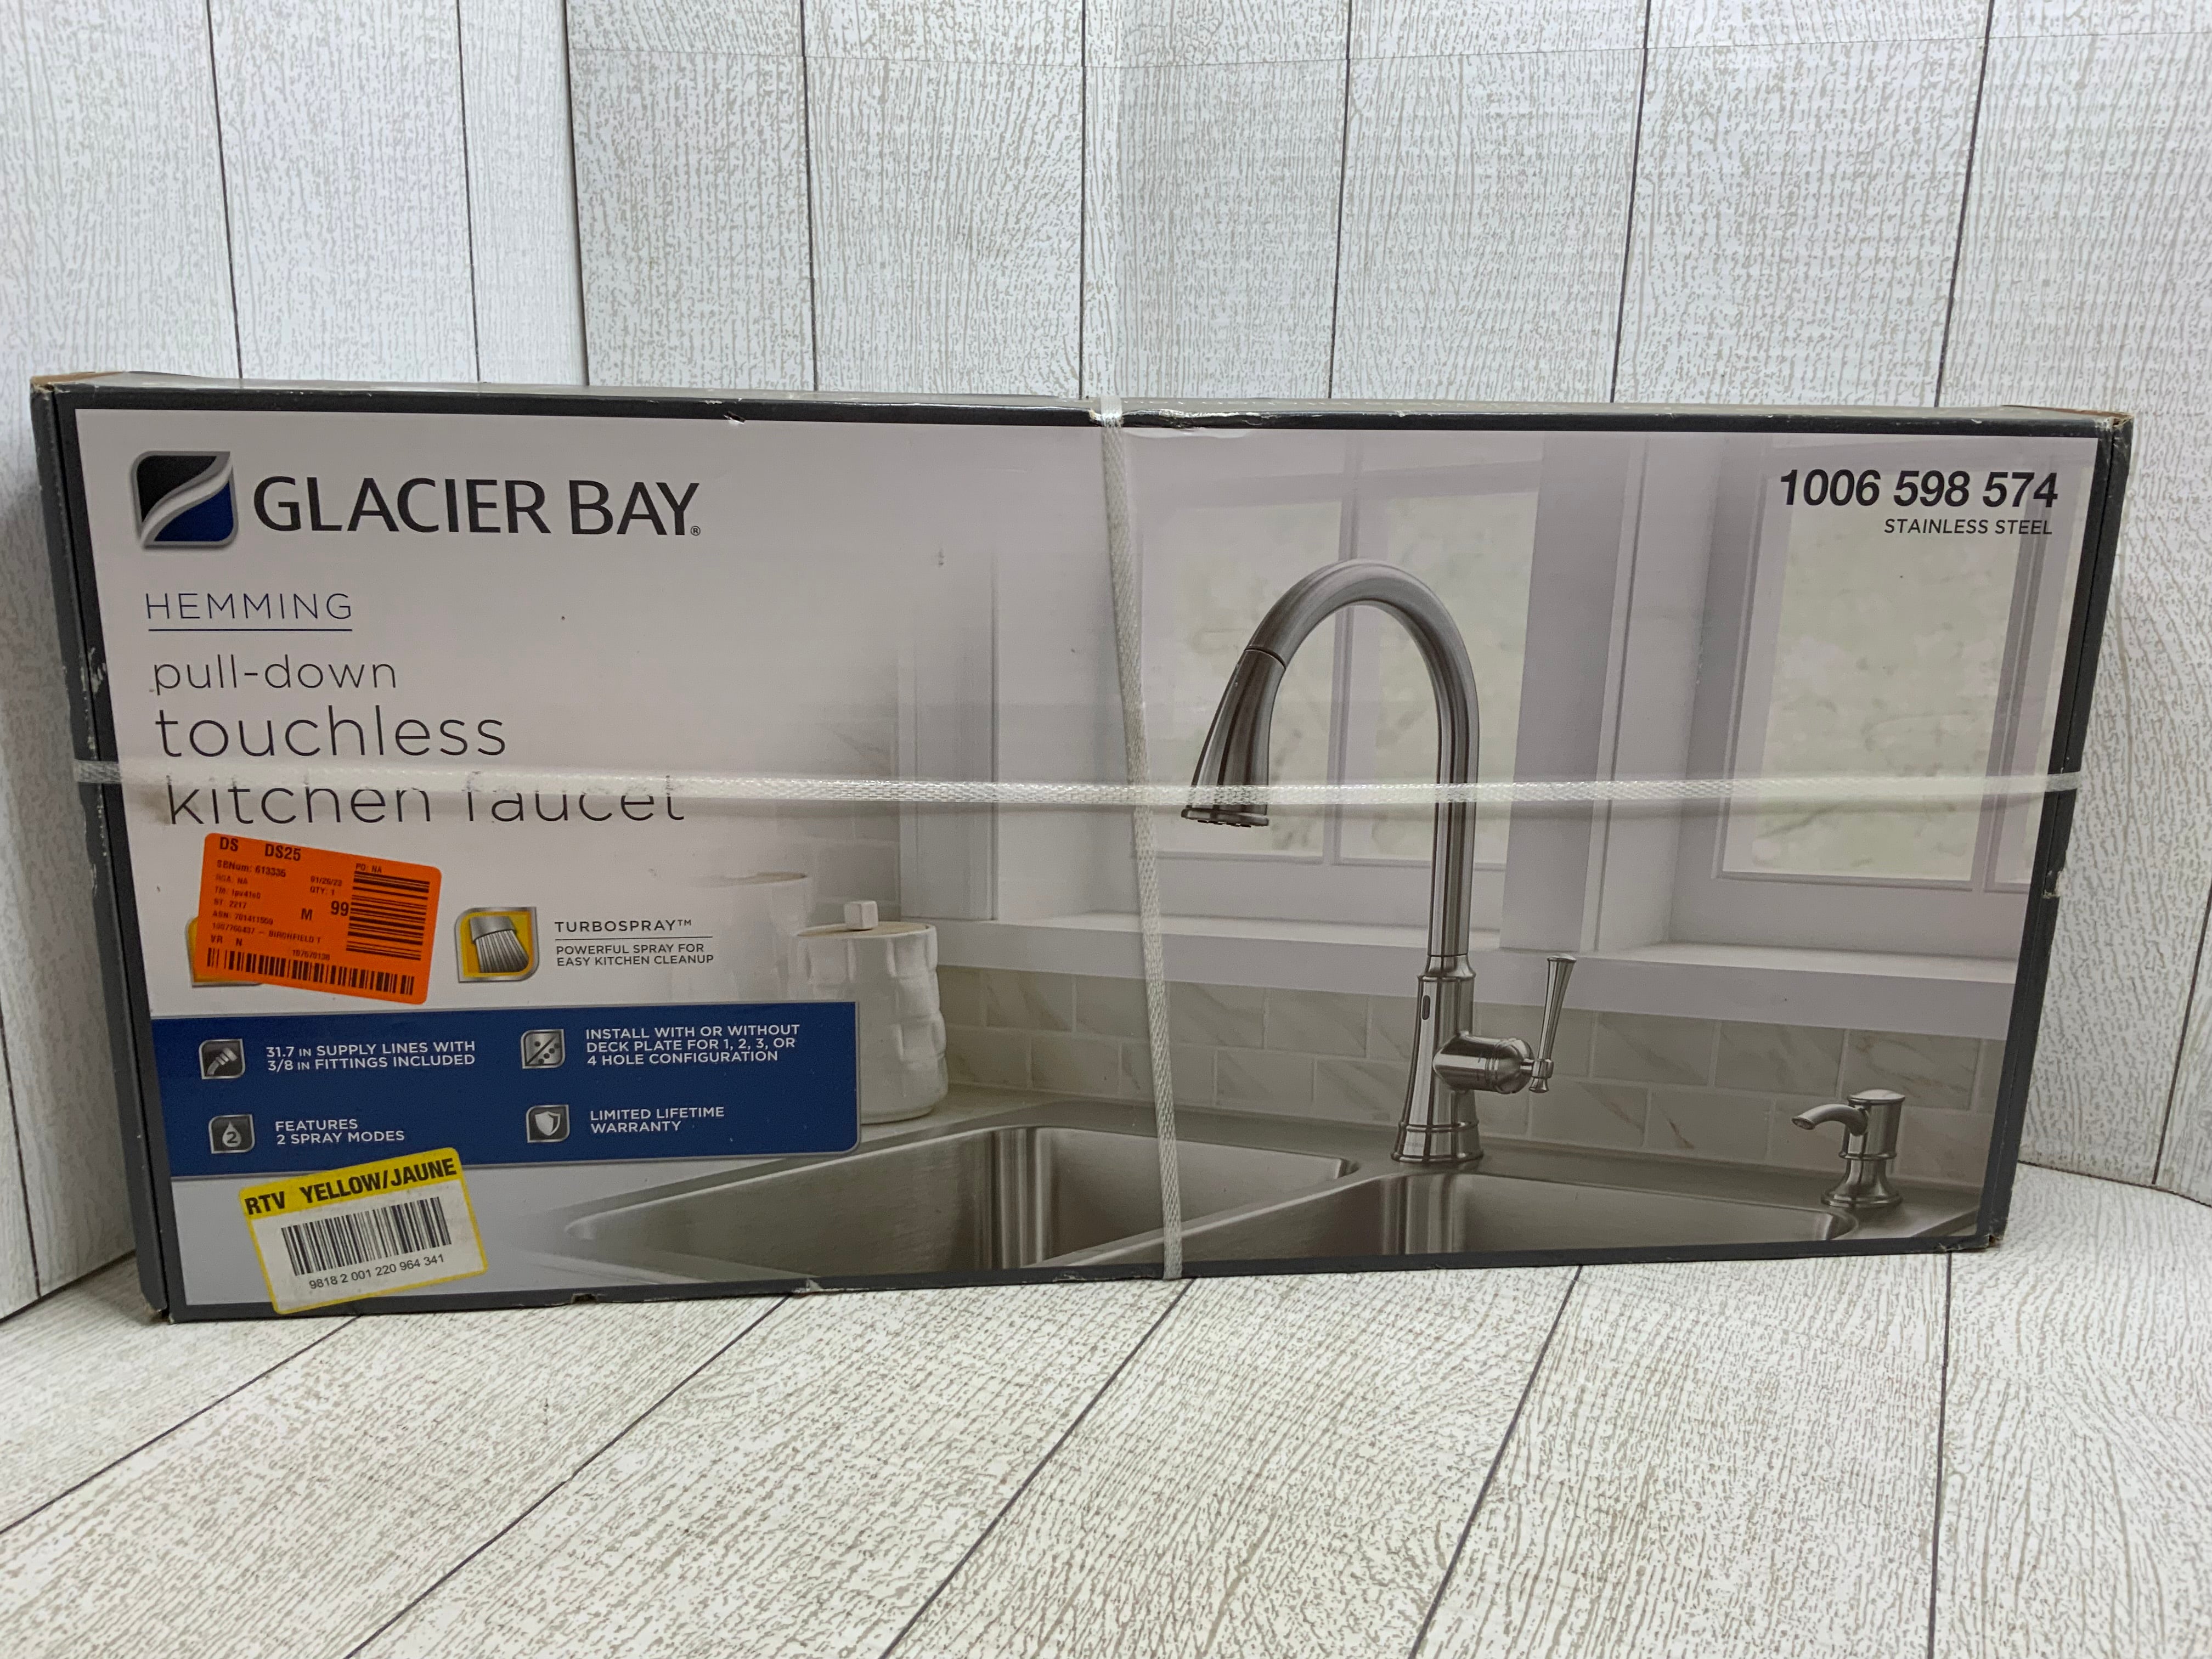 Glacier Bay Hemming Single Handle Touchless Pull Down Sprayer Kitchen Faucet (8044610322670)